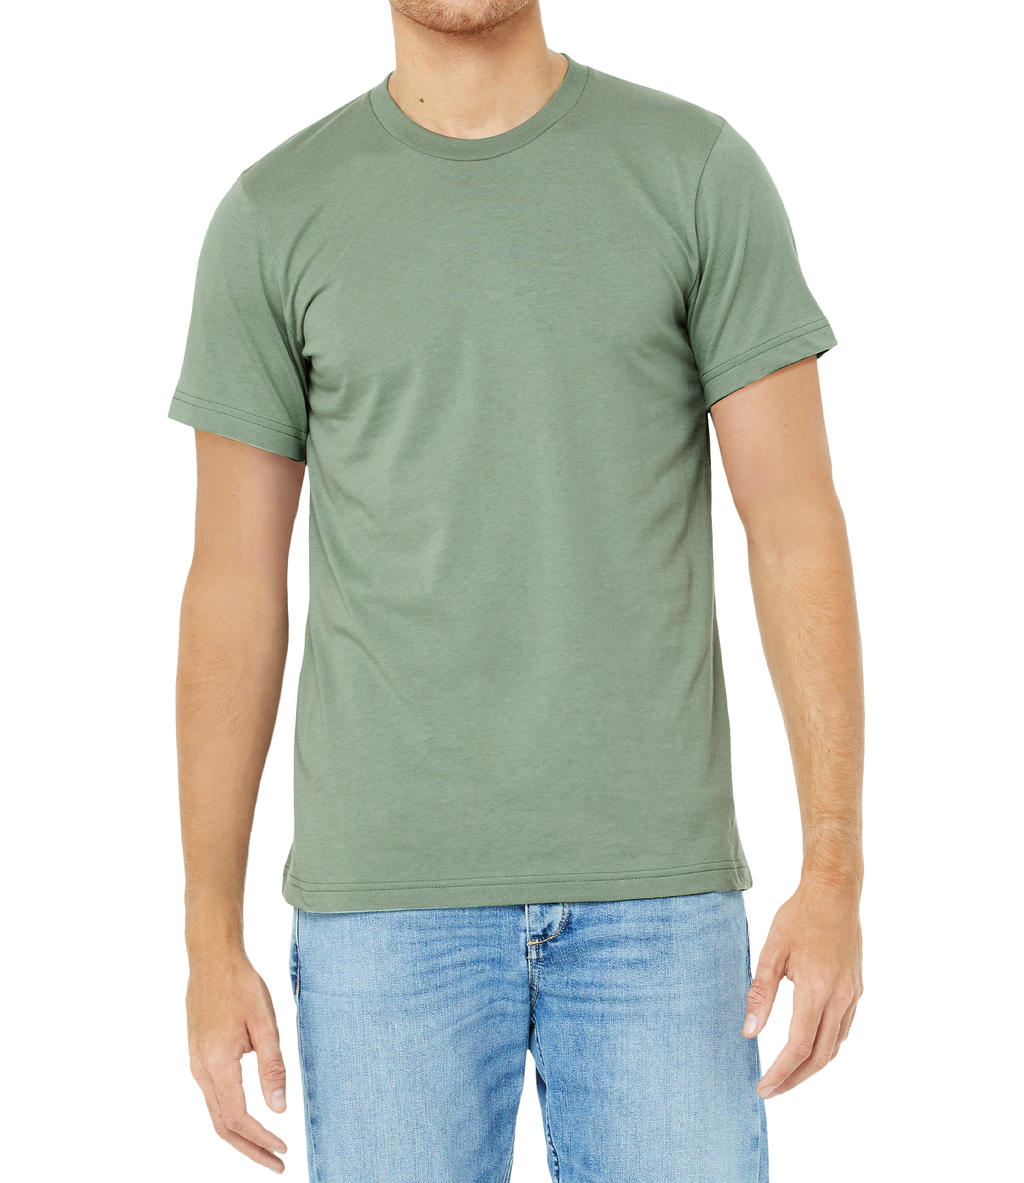  Unisex Jersey Short Sleeve Tee in Farbe Sage